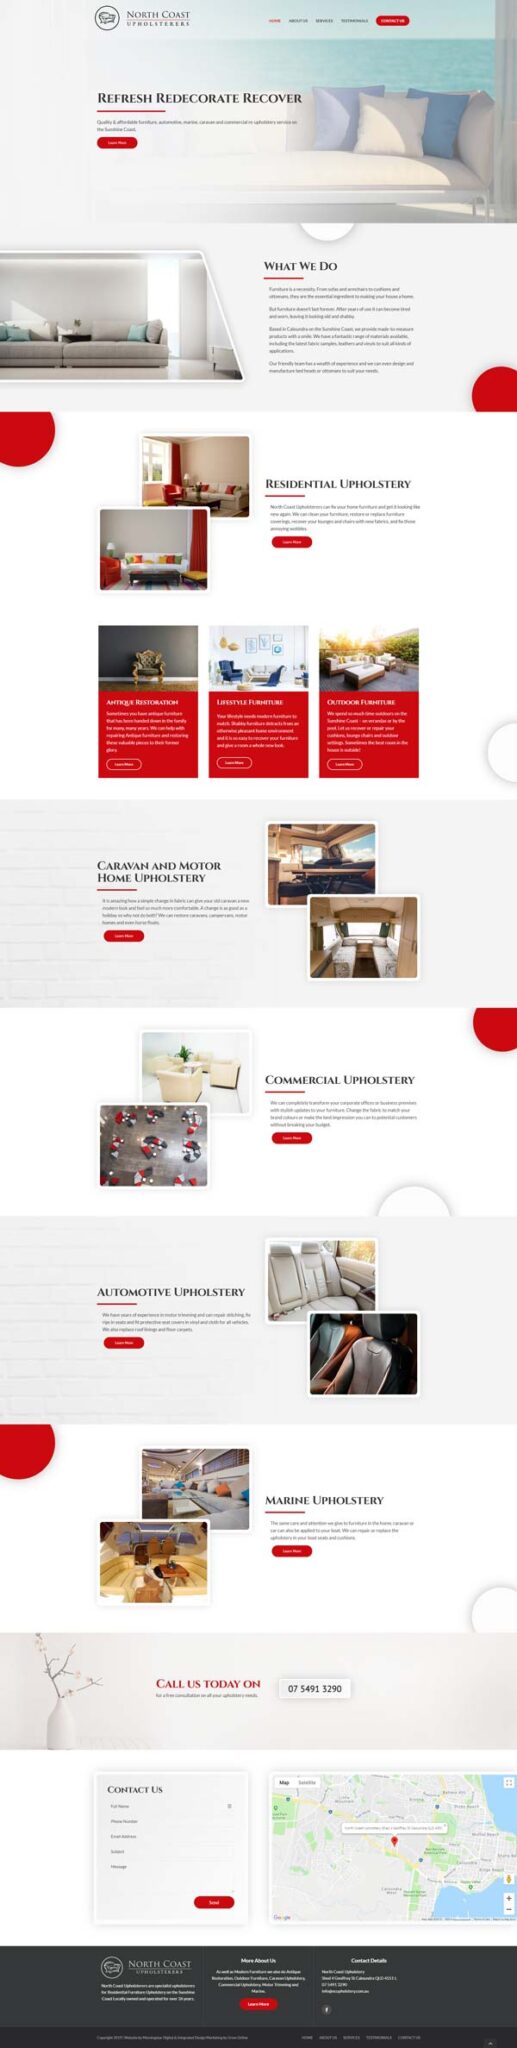 Ncu Full About North Coast Upholstery Website Design Company